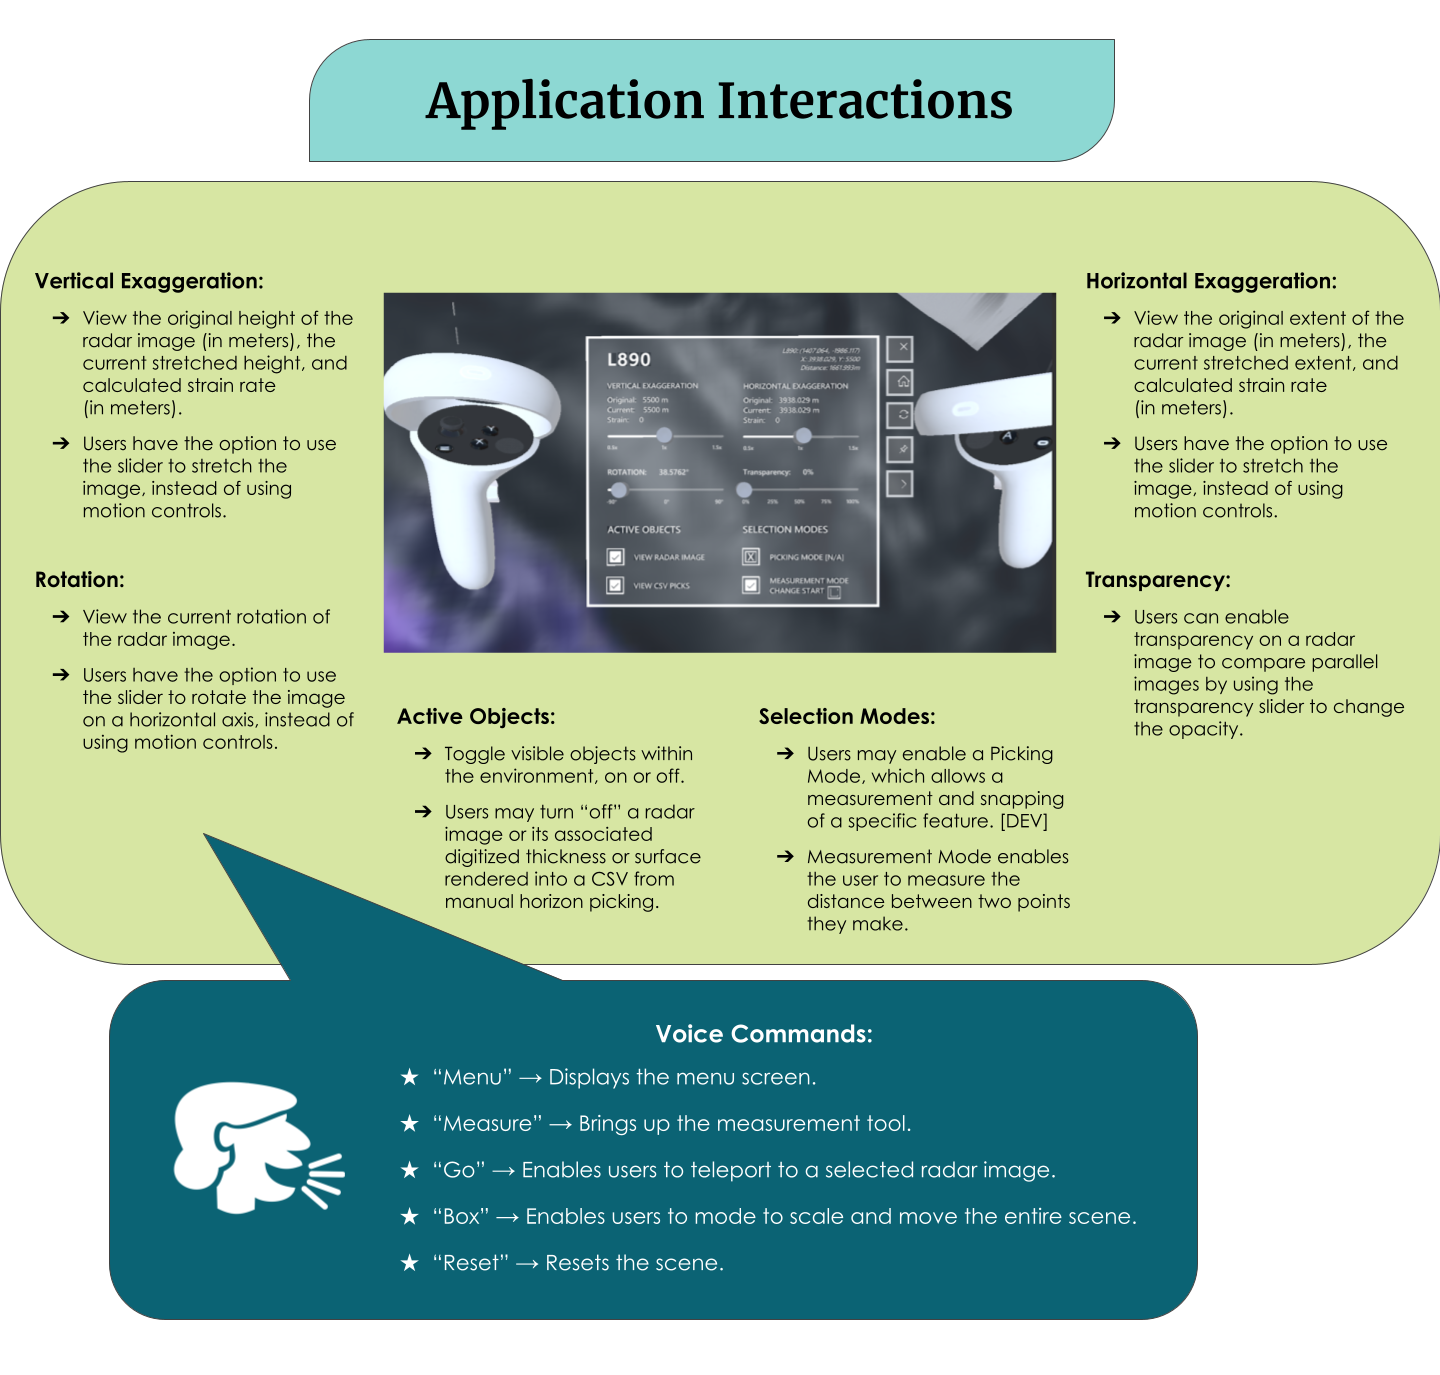 Infographic detailing antARctica application interactions, menu sliders, gesture controls, and voice commands